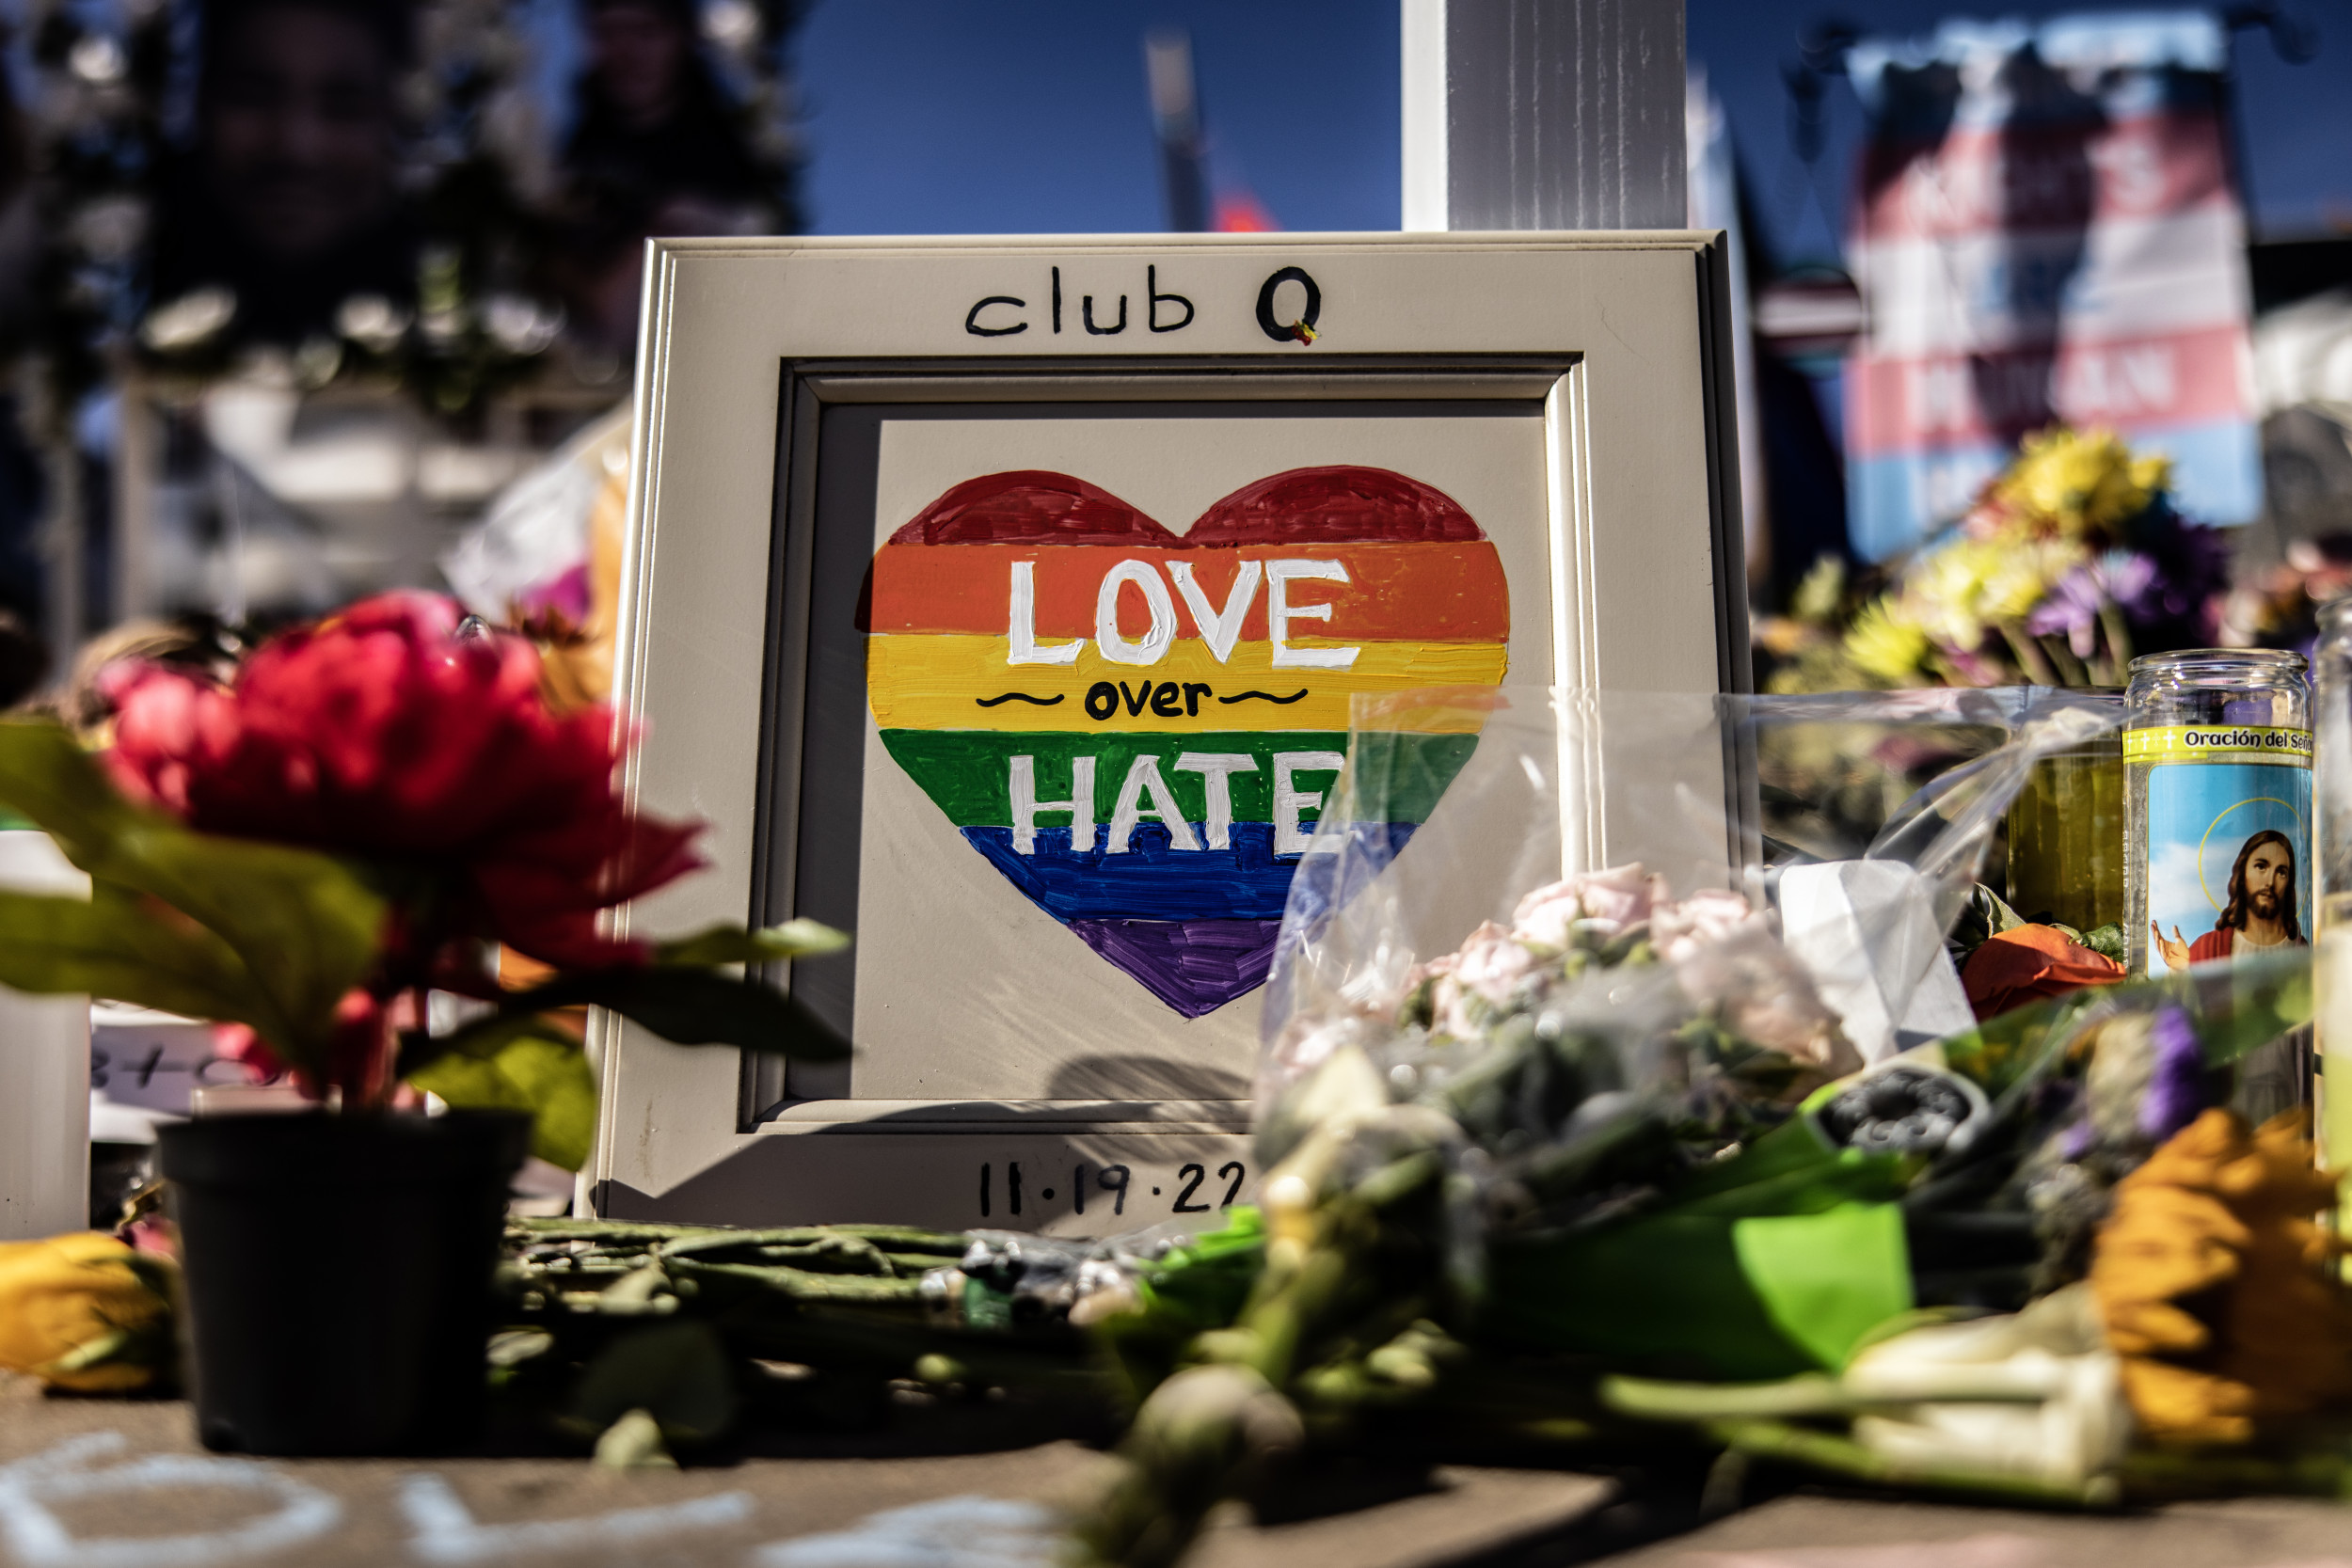 Anderson Lee Aldrich's Dad Was 'Scared' Son Was Gay After Club Q Shooting